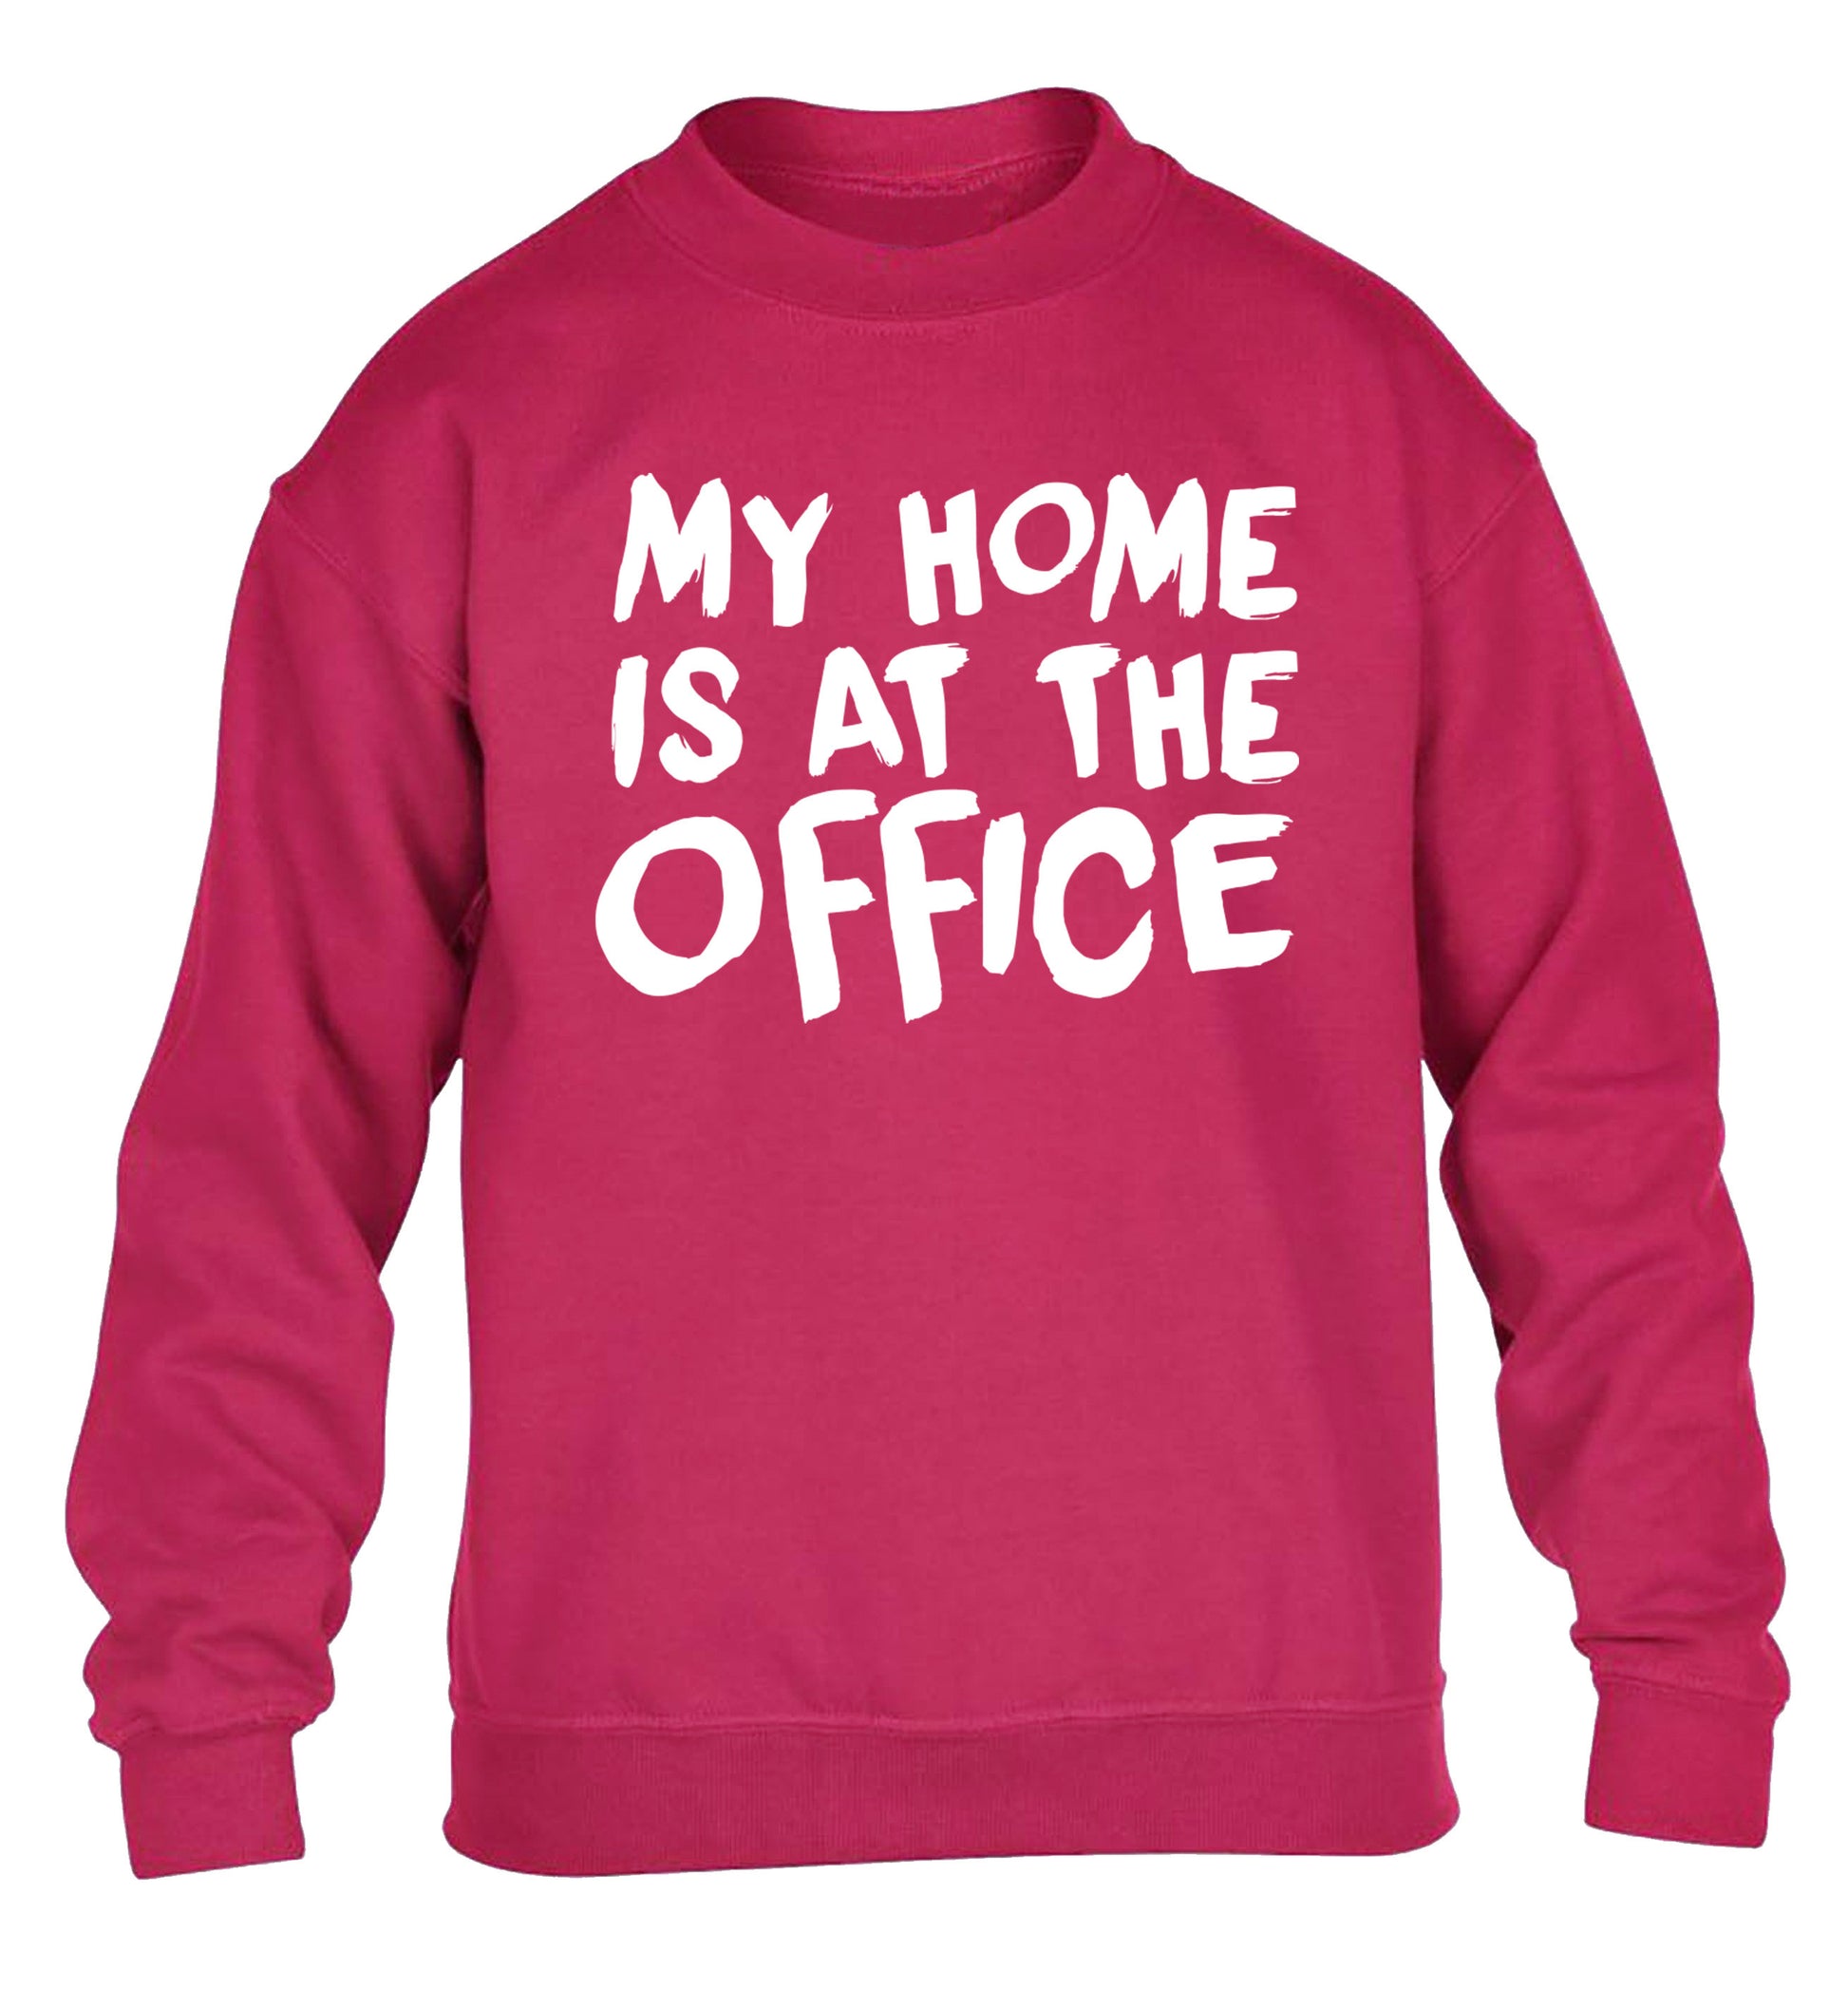 My home is at the office children's pink sweater 12-14 Years